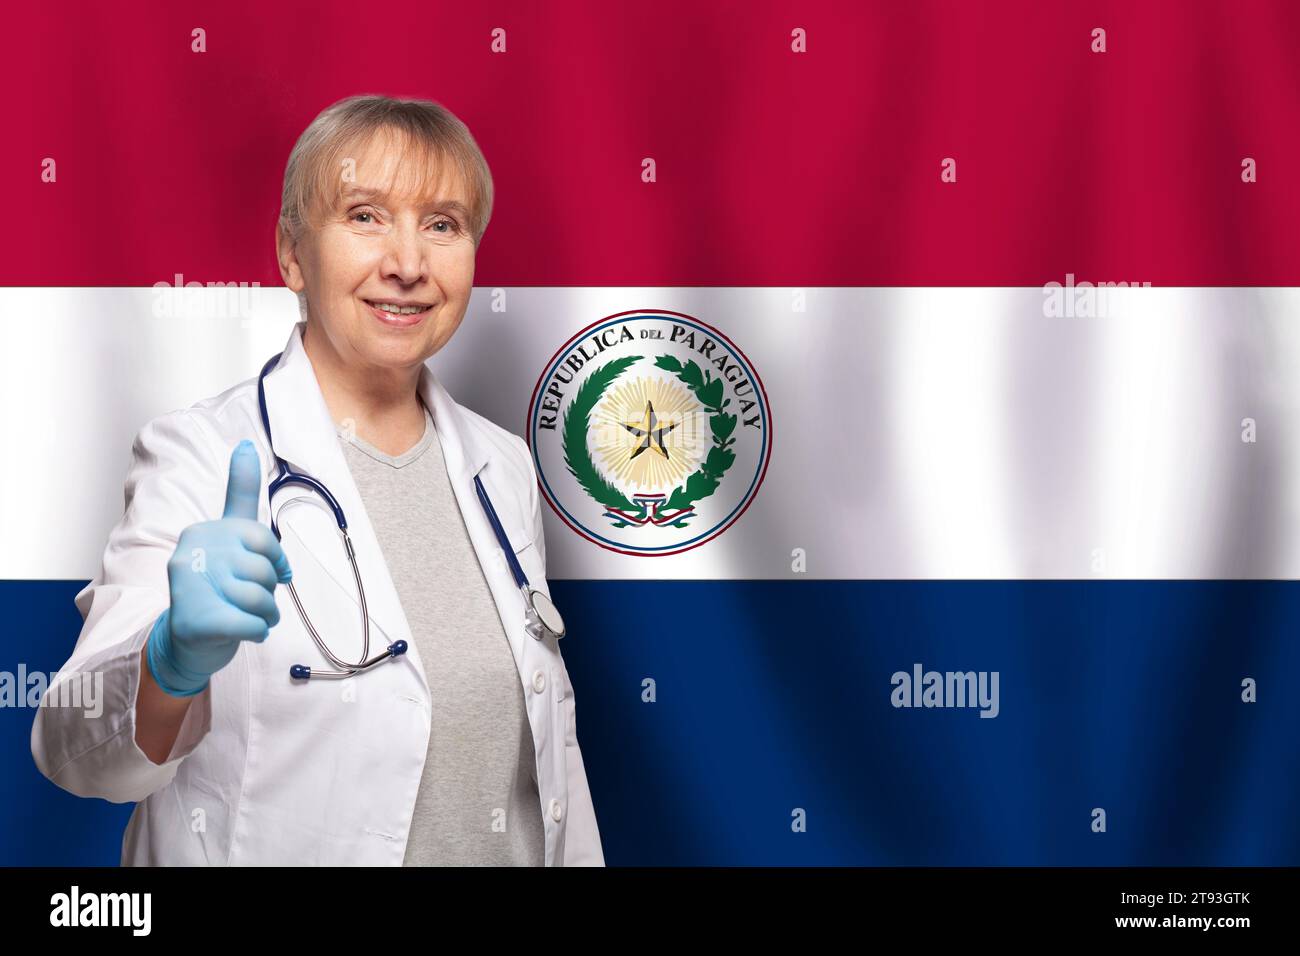 Paraguayan smiling mature doctor woman holding stethoscope on flag of Paraguay background Stock Photo